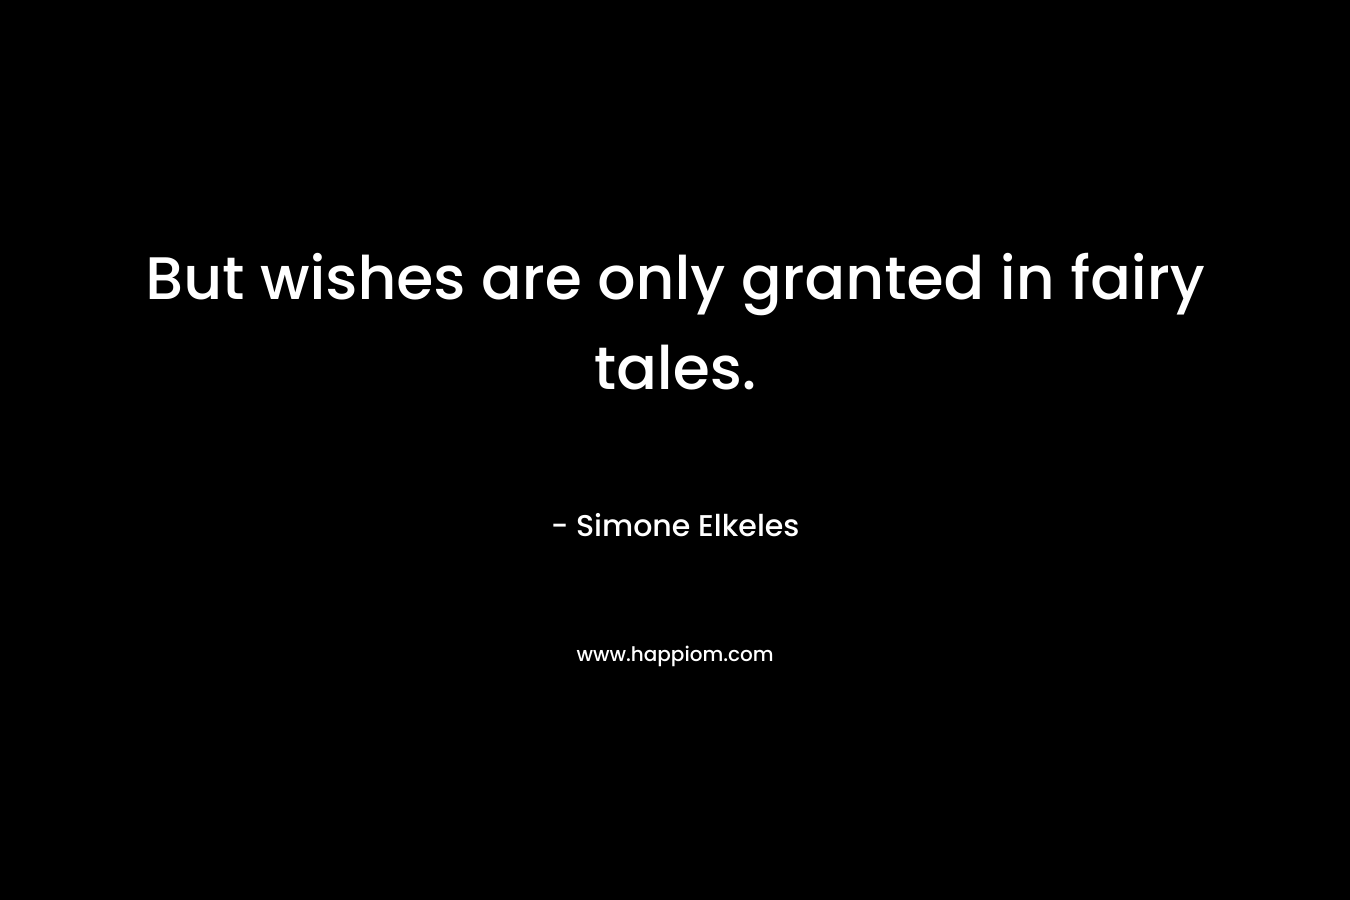 But wishes are only granted in fairy tales.